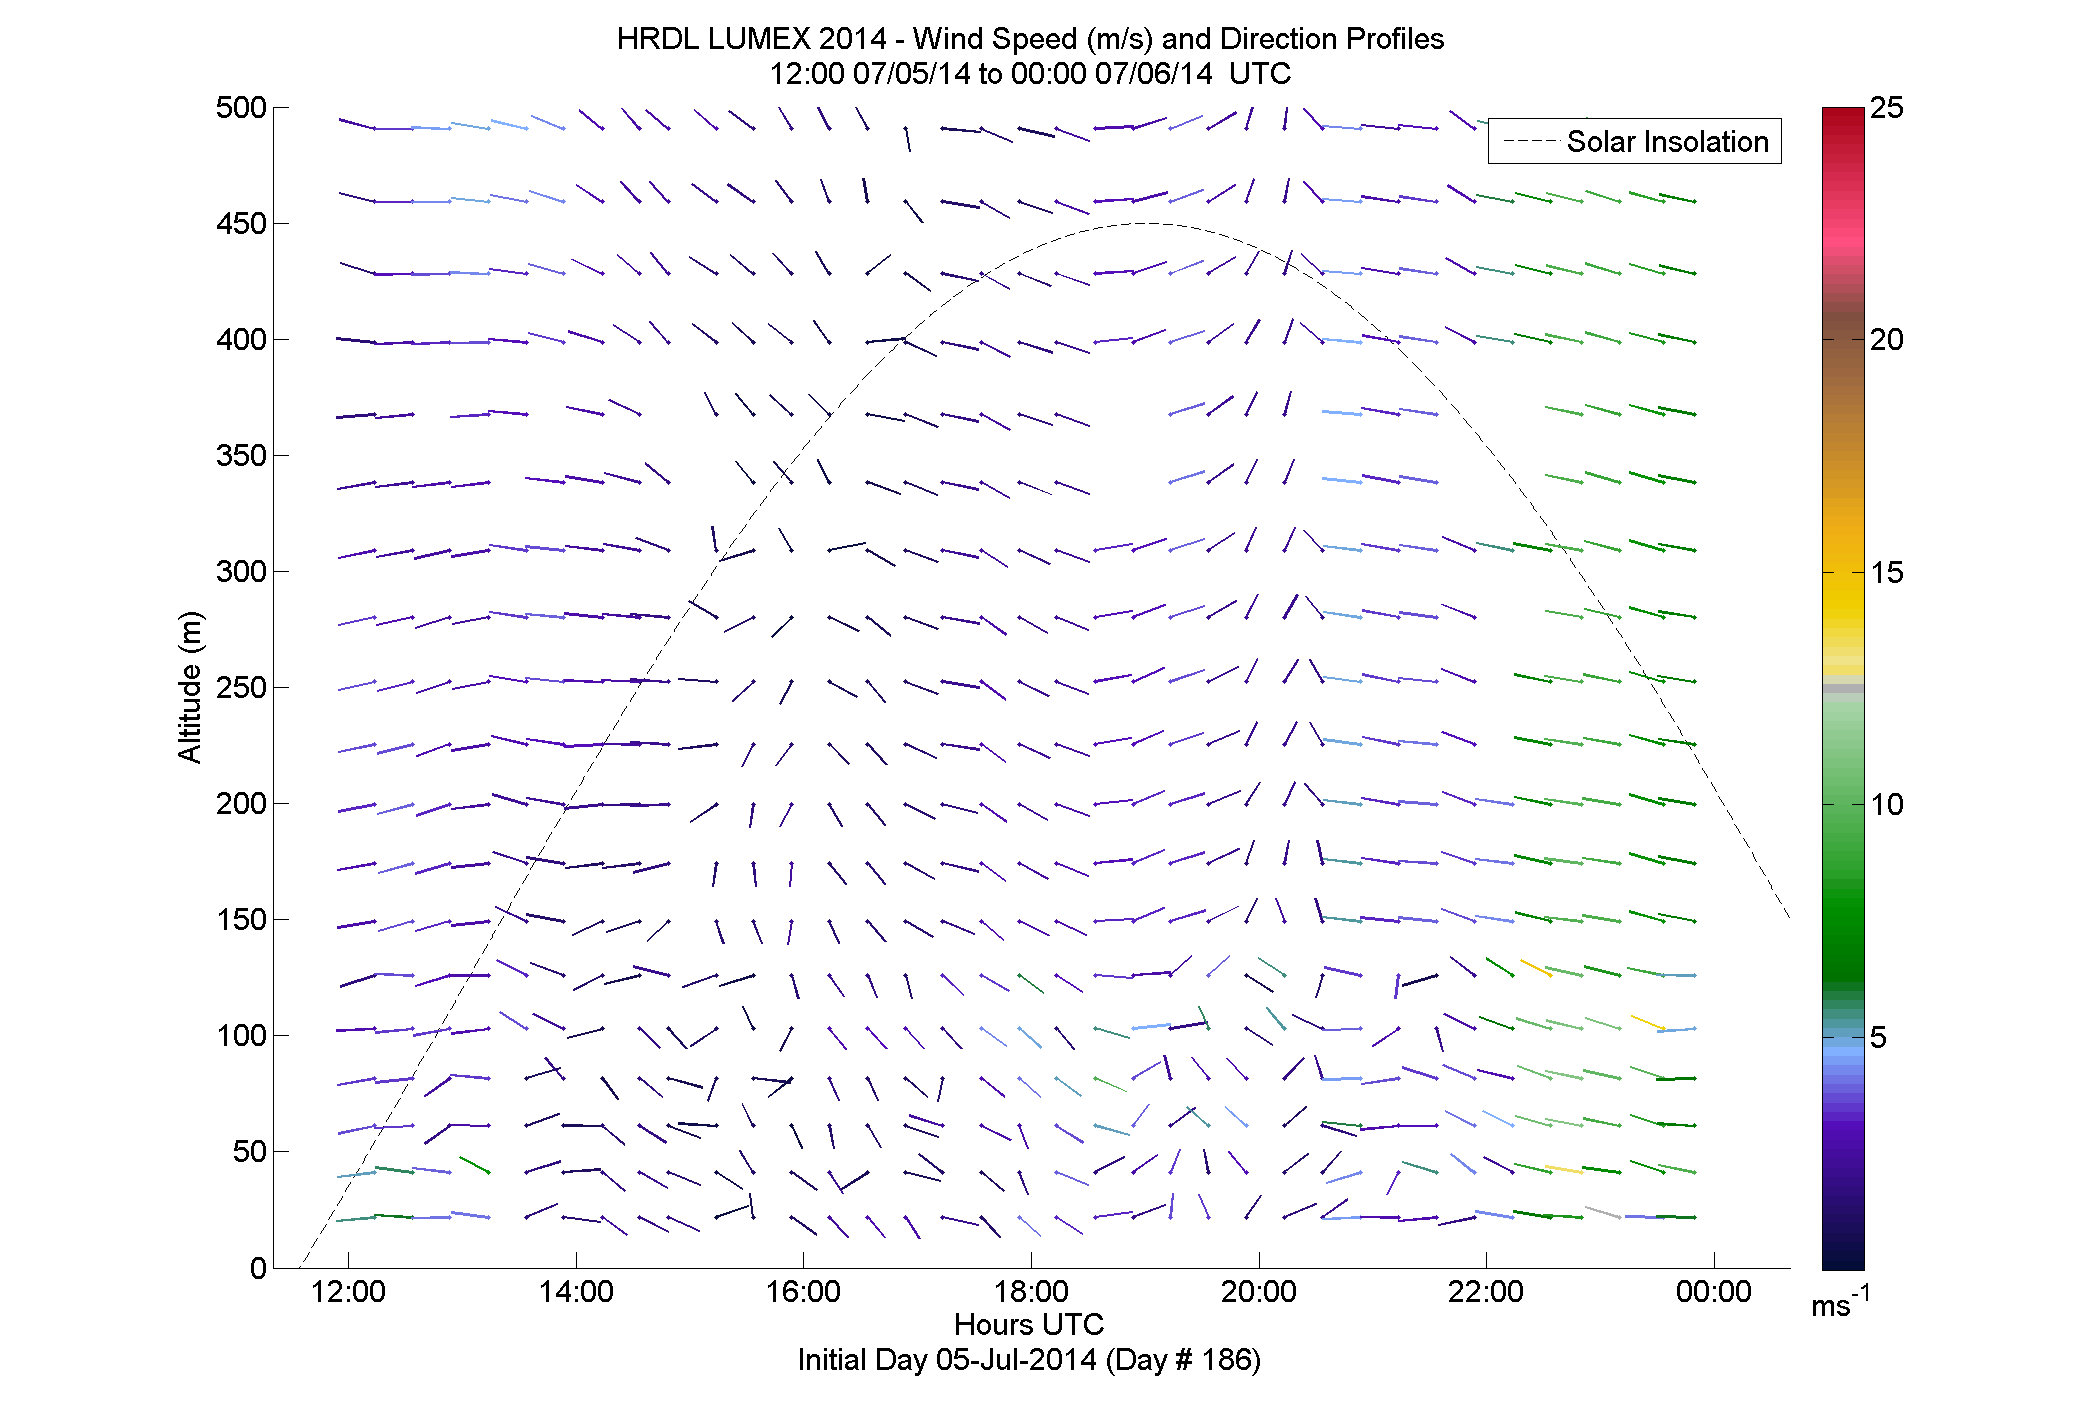 HRDL speed and direction profile - July 5 pm